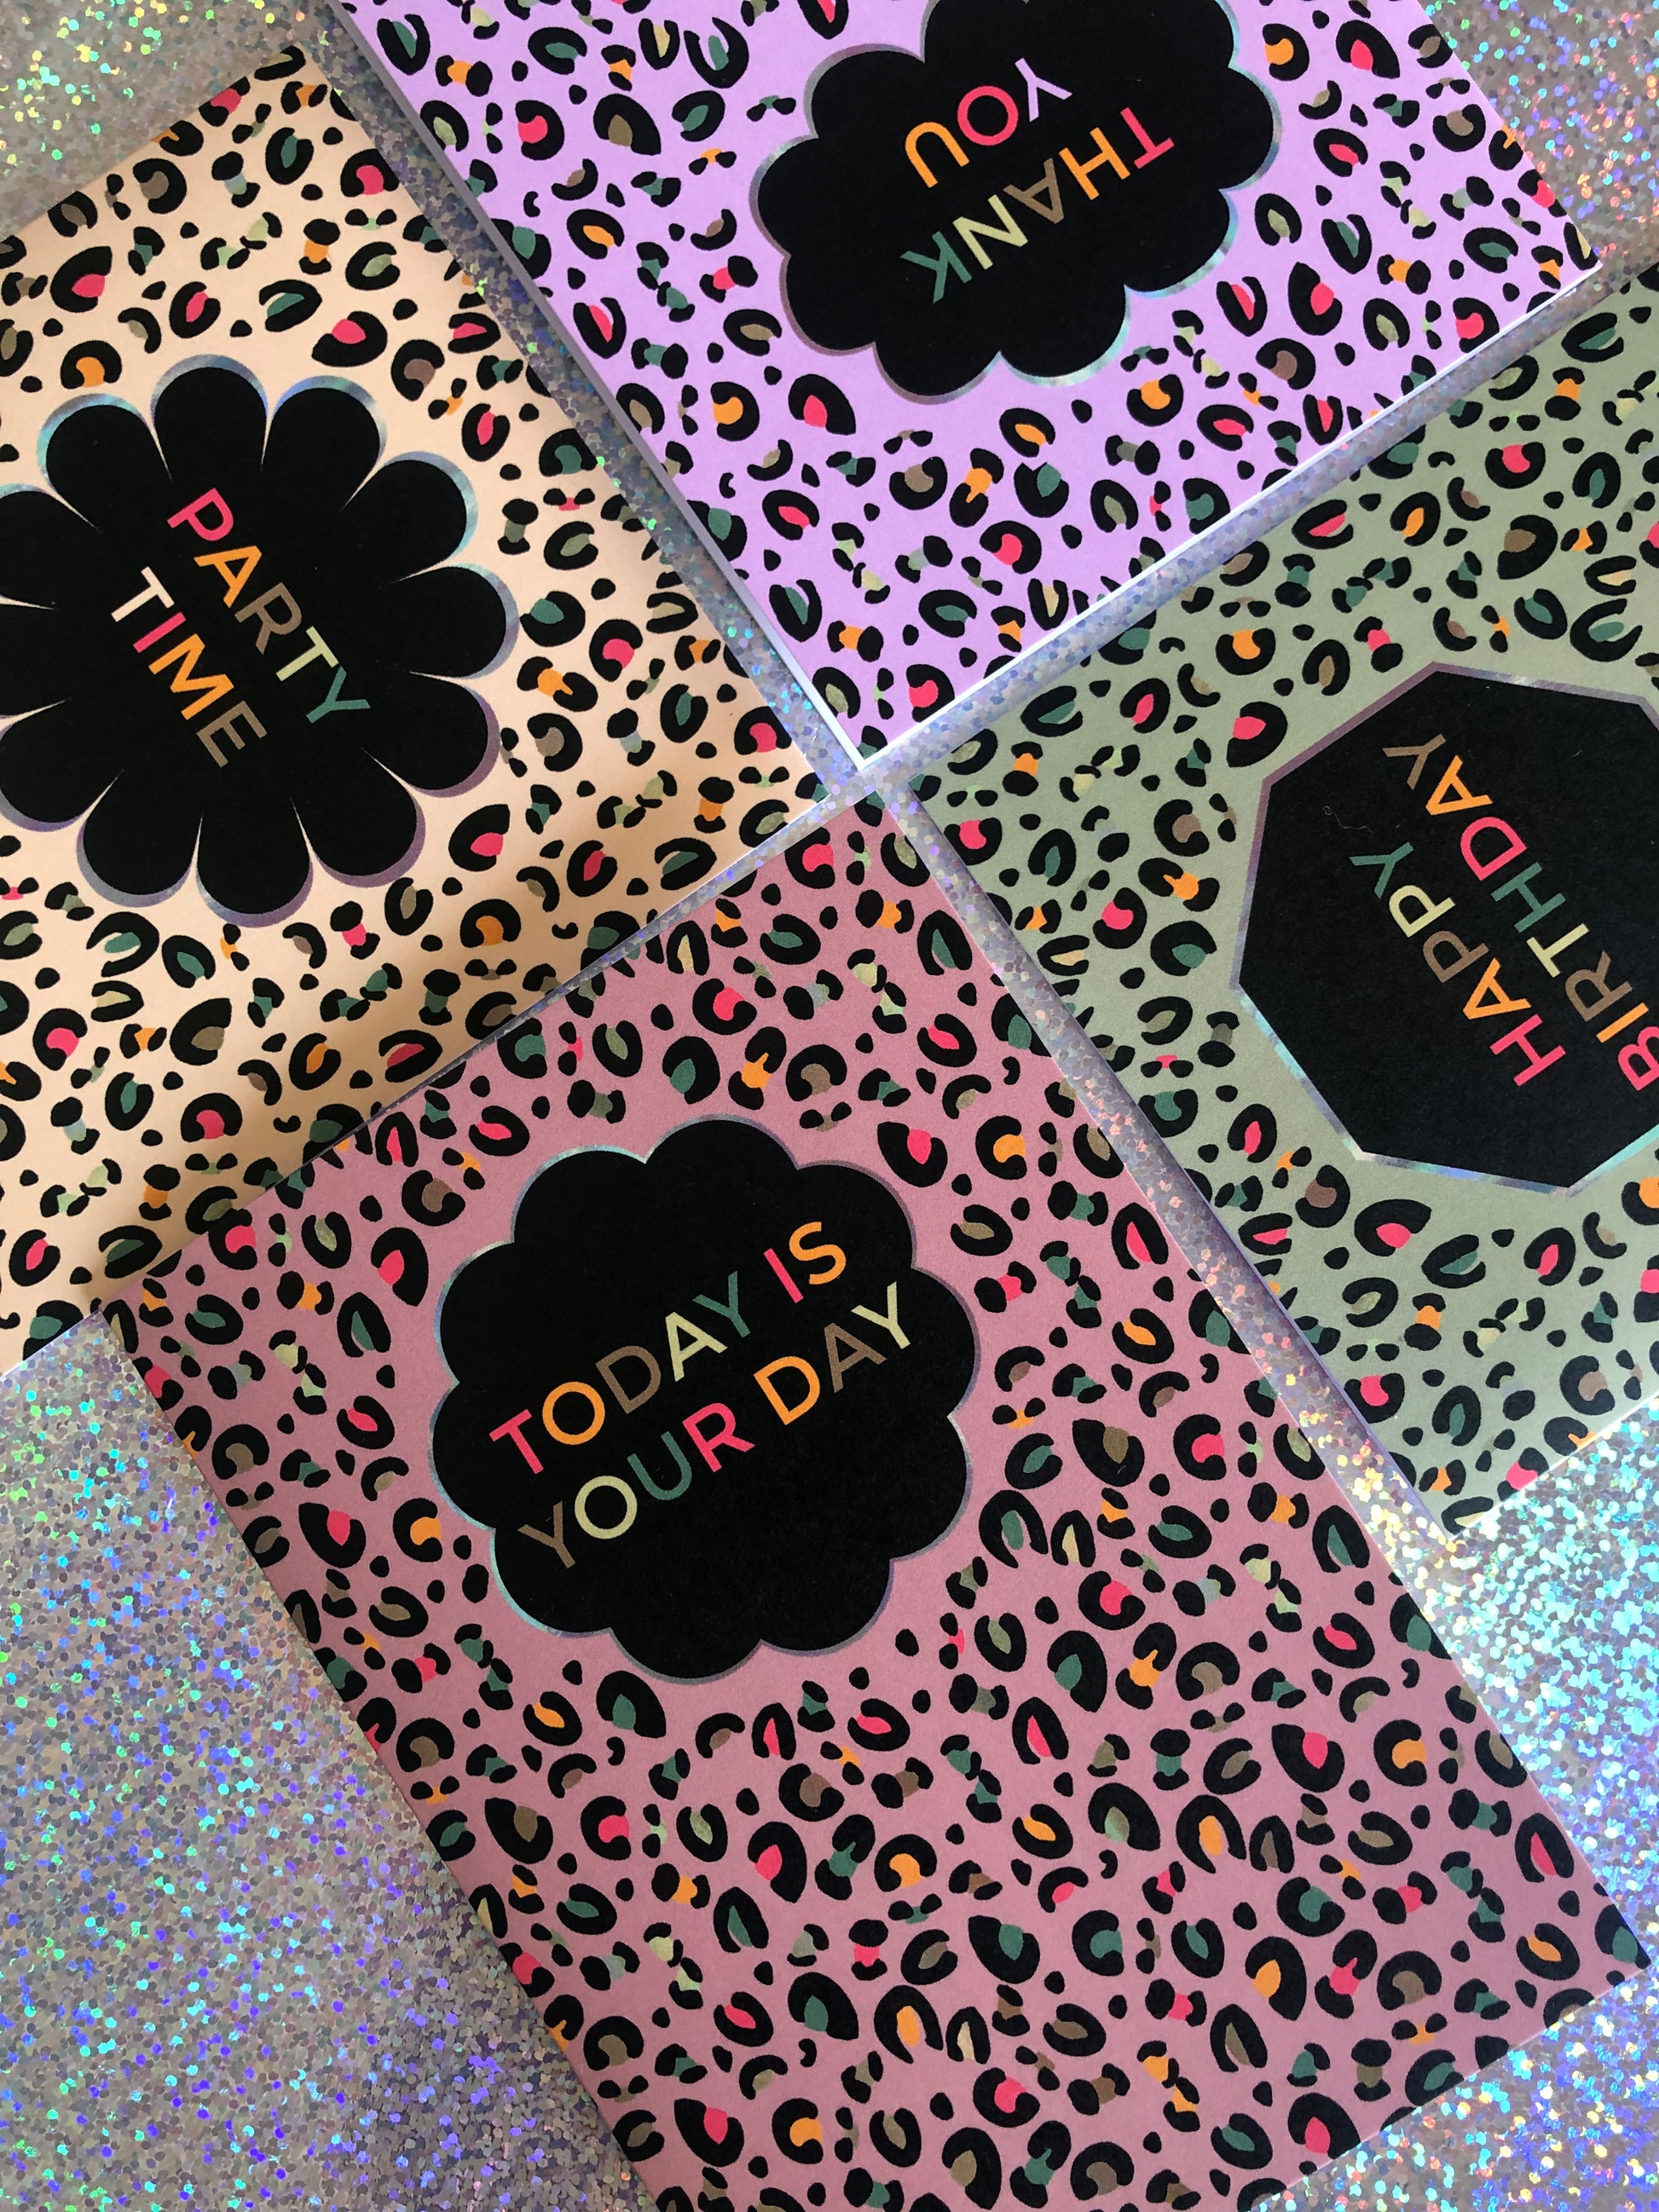 Leopard Print Today is your day card with pink print and pops of neon.